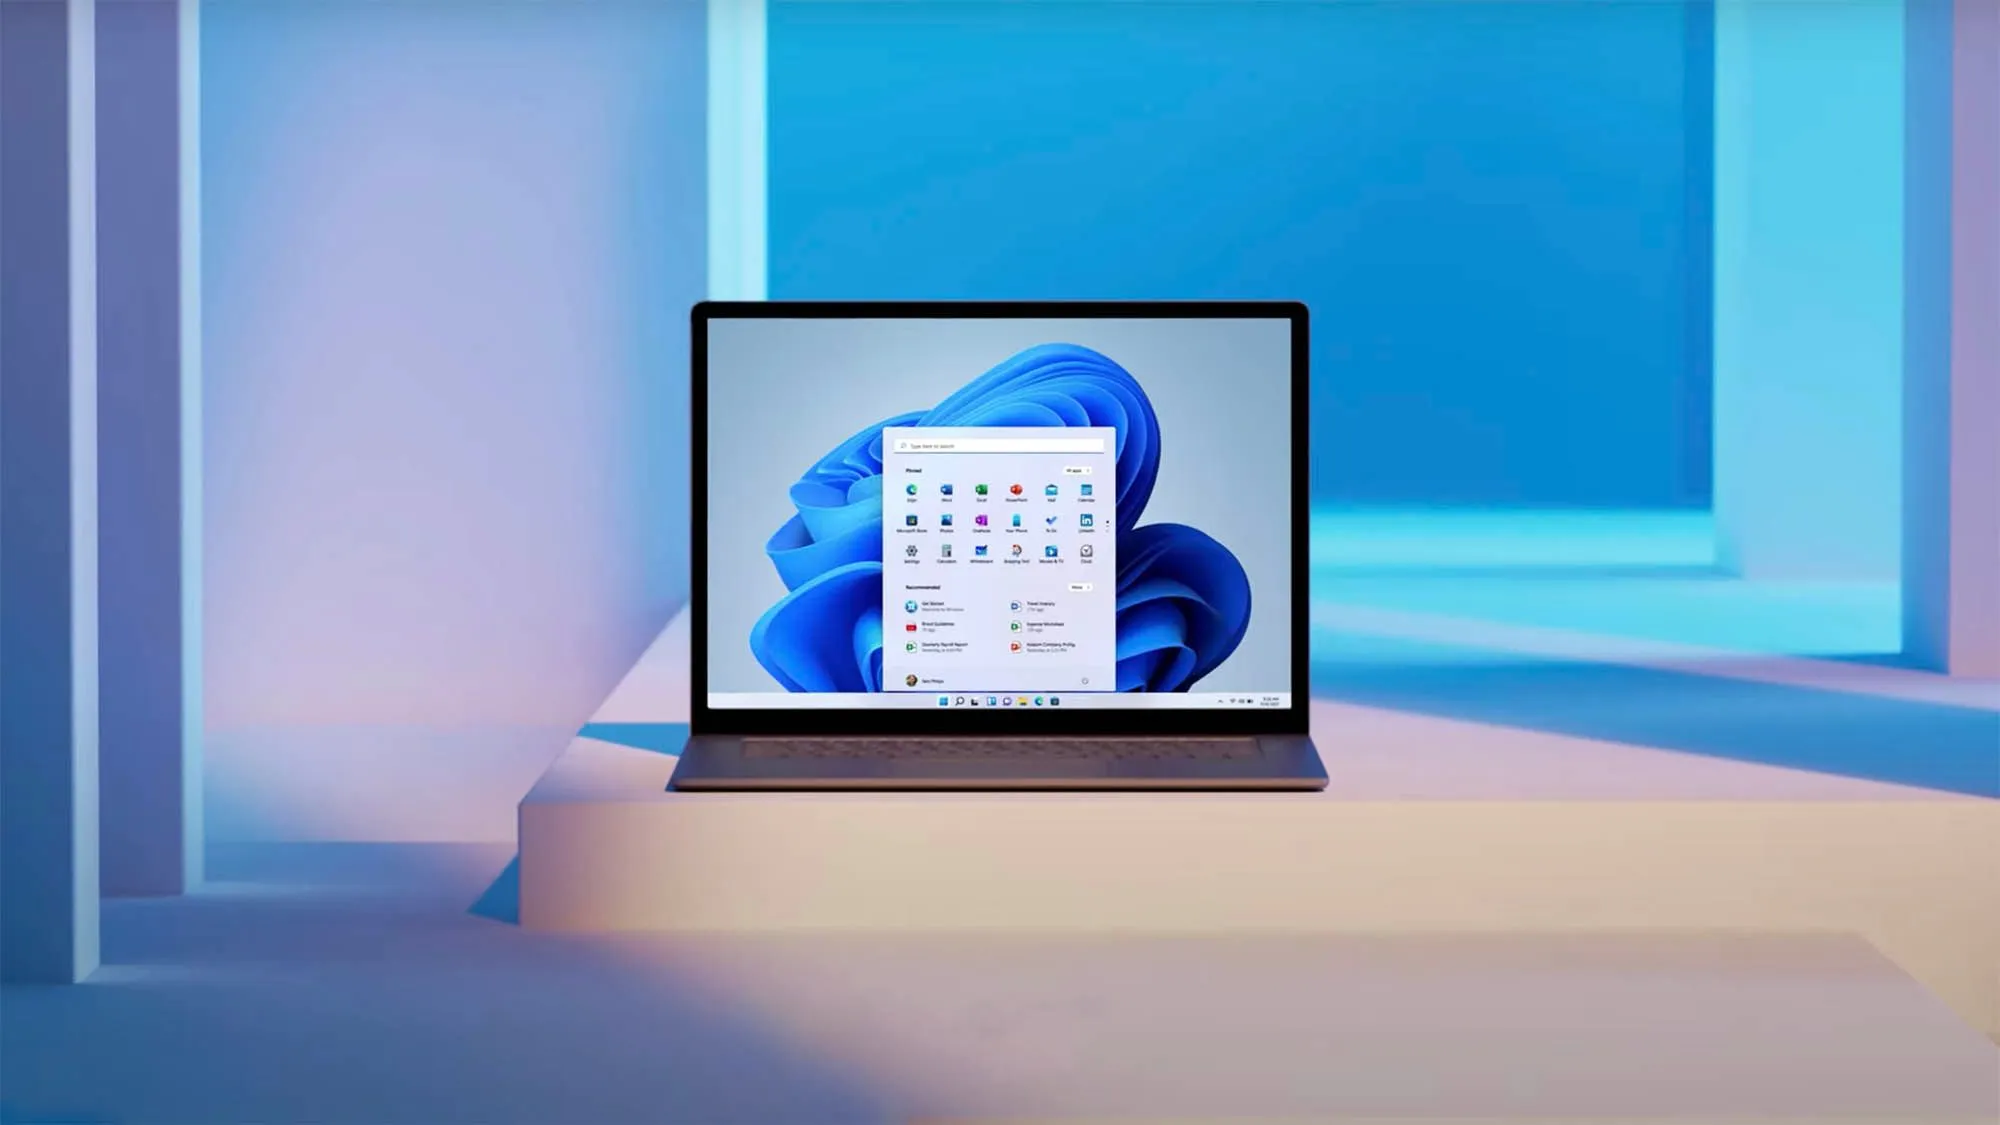 Windows 11 on a laptop in front of a colorful background